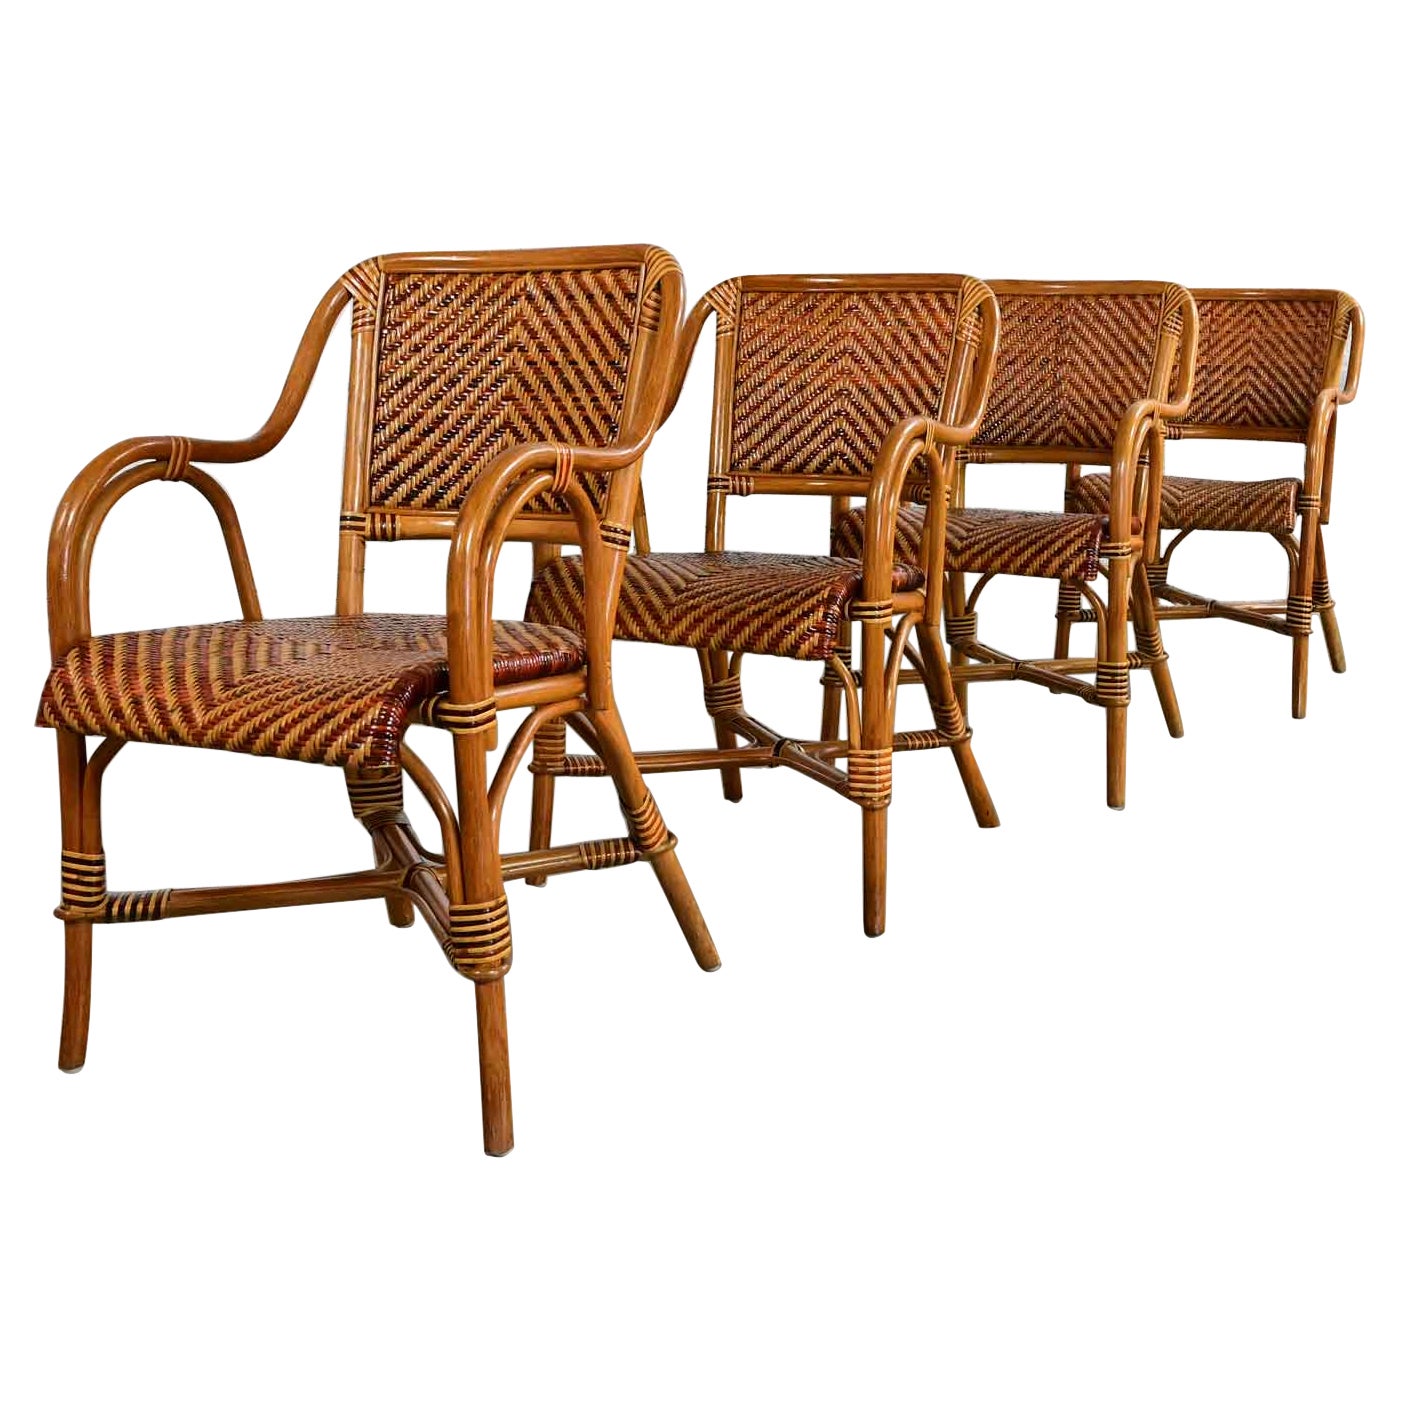 Boho Chic 2 Toned Wicker Rattan Café Bistro or Conservatory Armchairs Set of 4